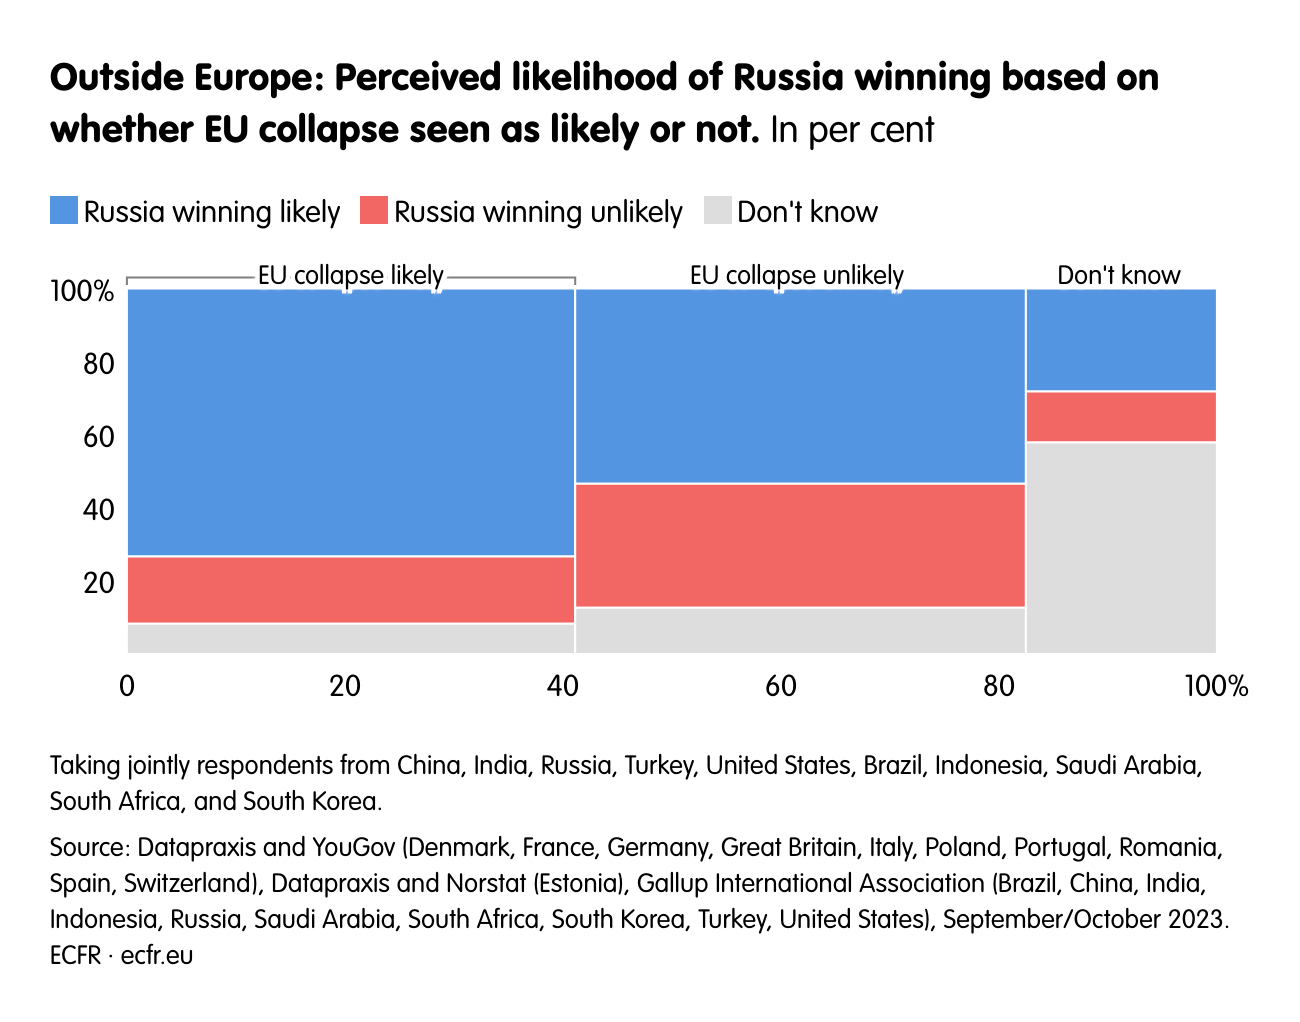 Outside Europe: Perceived likelihood of Russia winning based on whether EU collapse seen as likely or not.